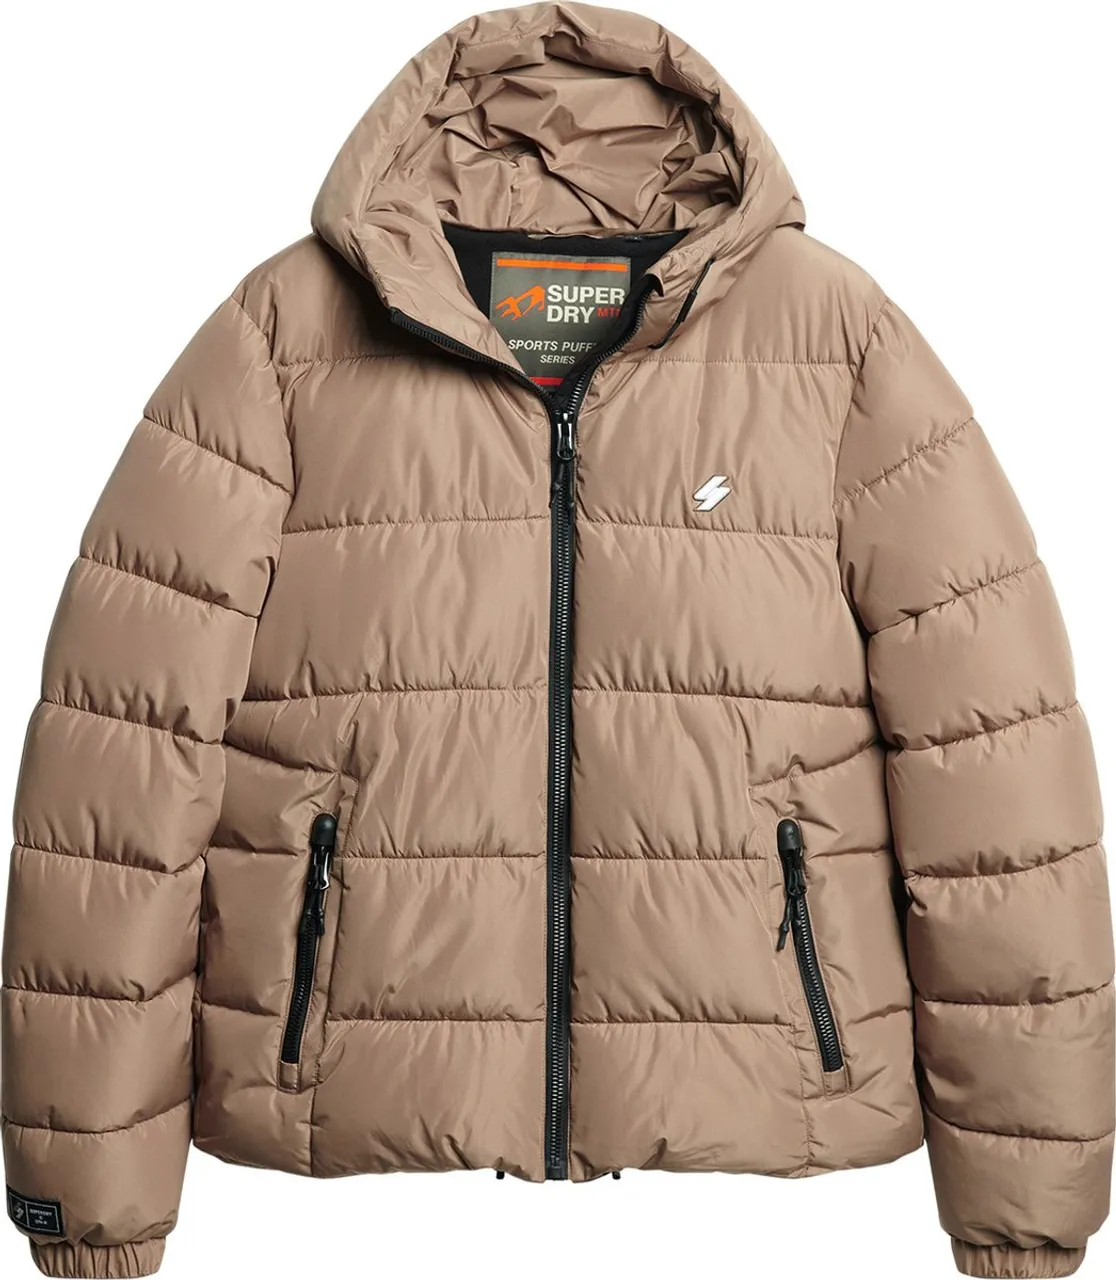 Superdry Hooded Sports Puffr Jacket Heren Jas - Fossil Brown